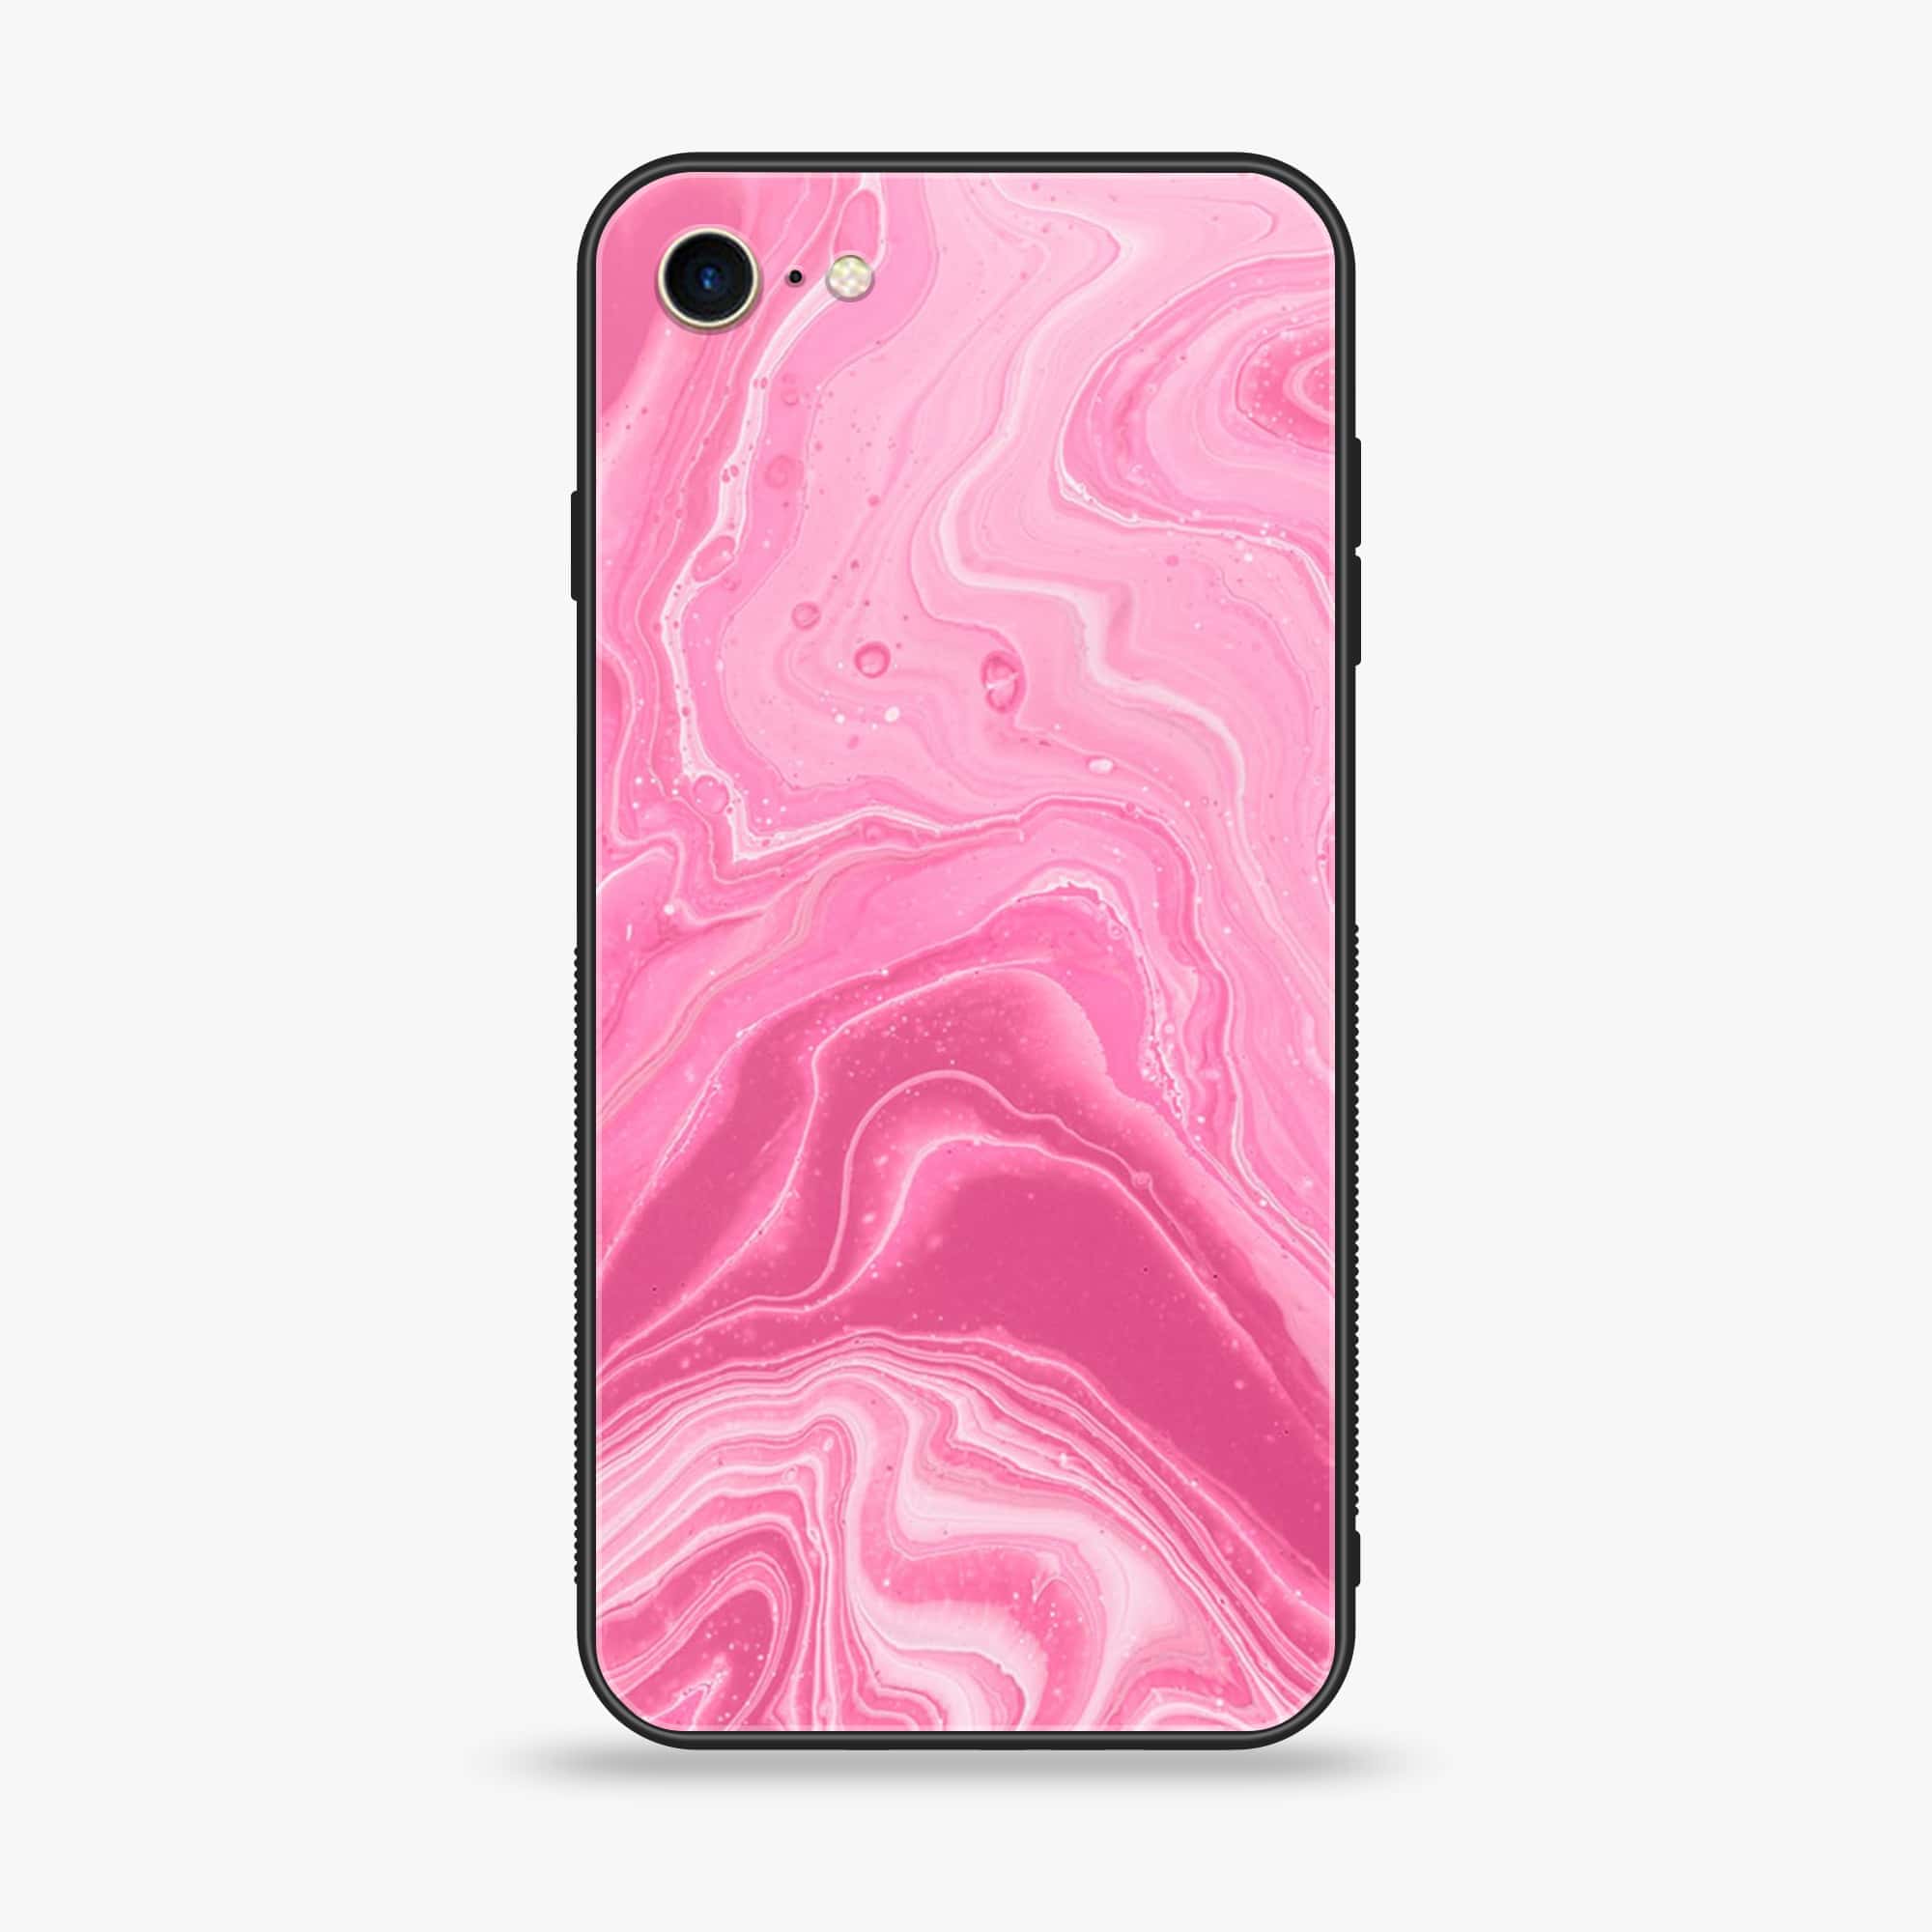 iPhone 6 - Pink Marble Series - Premium Printed Glass soft Bumper shock Proof Case